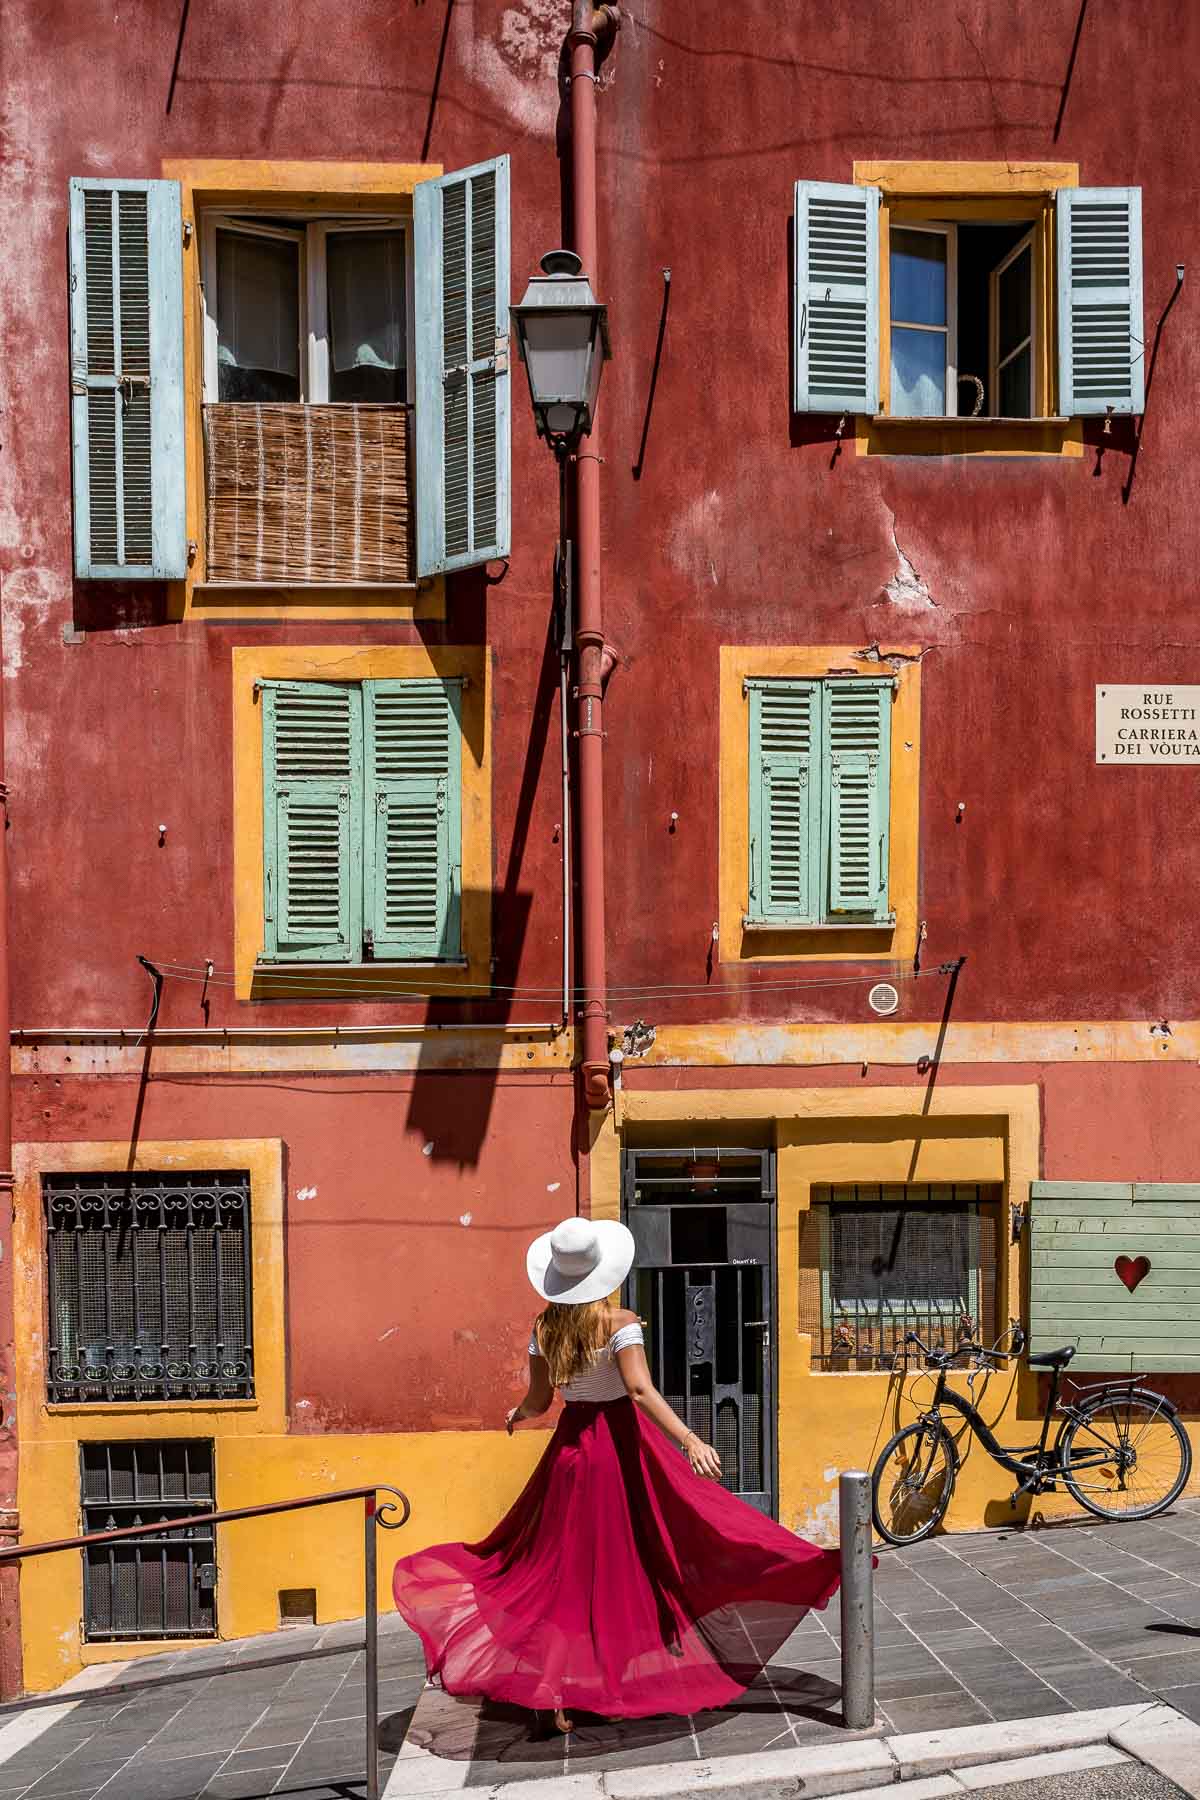 Girl in a red dress twirling in front of a colorful building in Nice, France